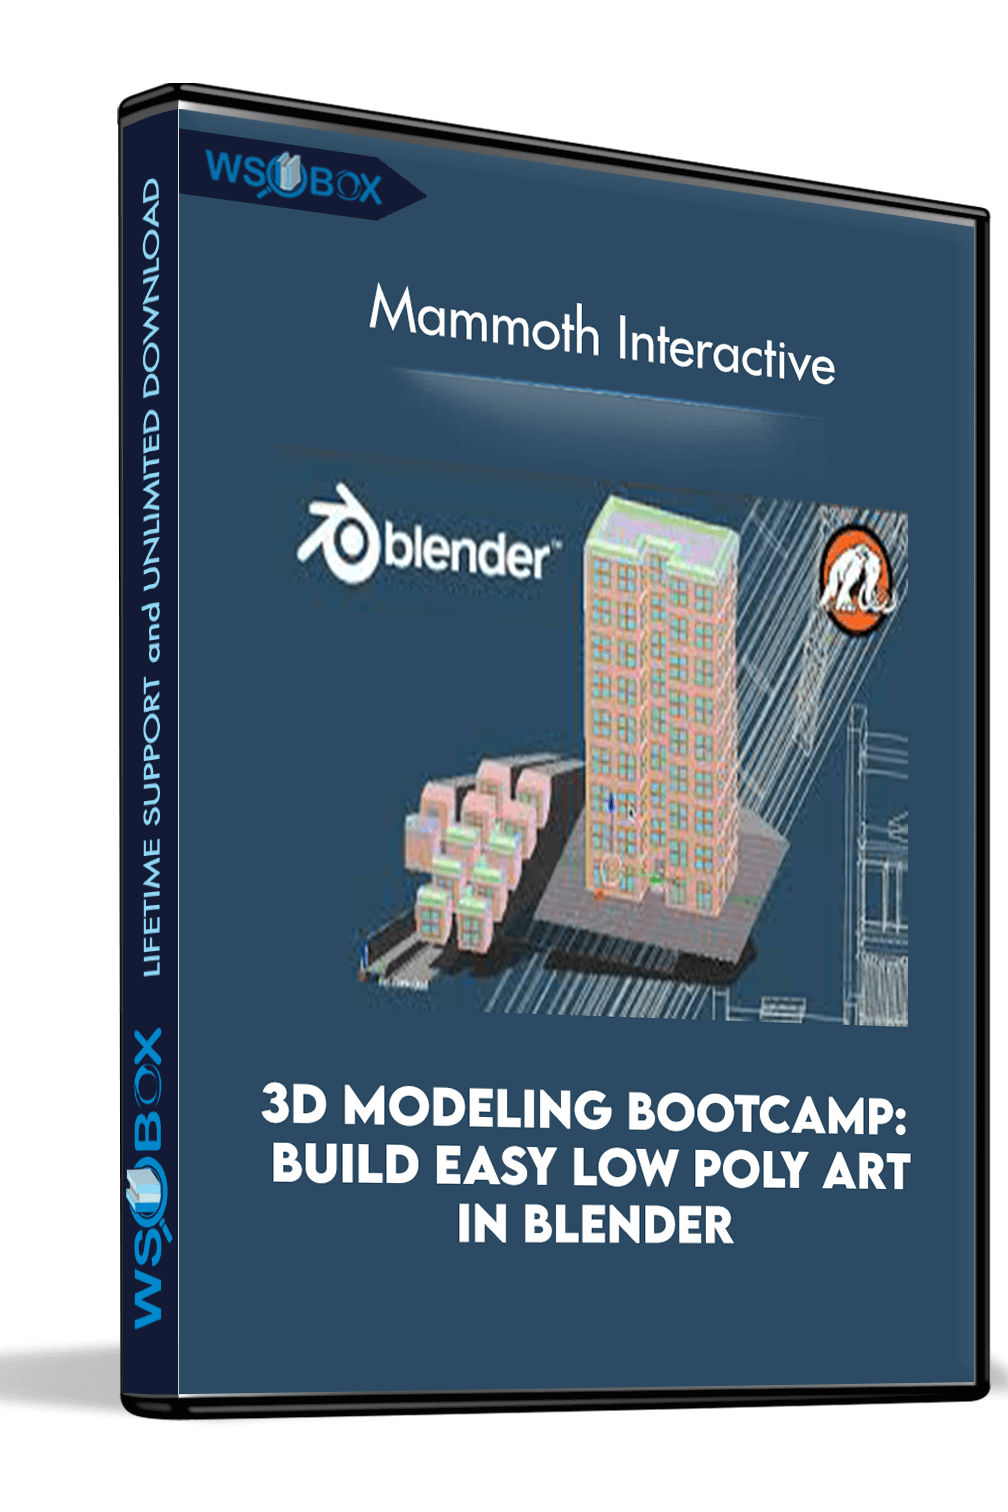 3d-modeling-bootcamp-build-easy-low-poly-art-in-blender-mammoth-interactive